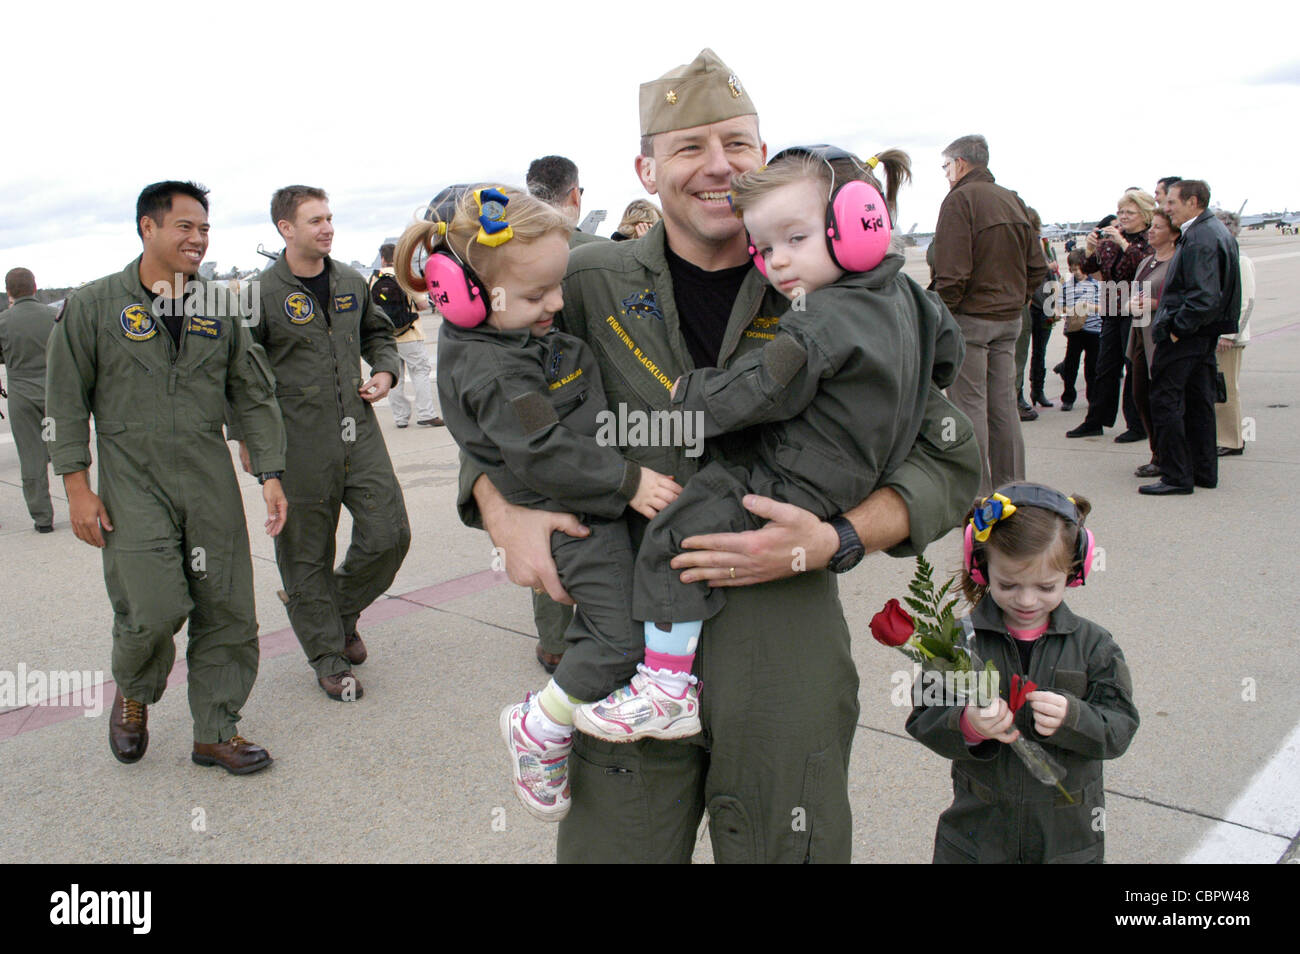 NAVAL AIR STATION OCEANA (Dec. 07, 2011) Lt. Cmdr. Joseph Greenslade, assigned to Strike Fighter Squadron (VFA) 213, hugs his twin daughters after the squadron returned from six-month deployment aboard USS George H.W. Bush (CVN 77). Stock Photo